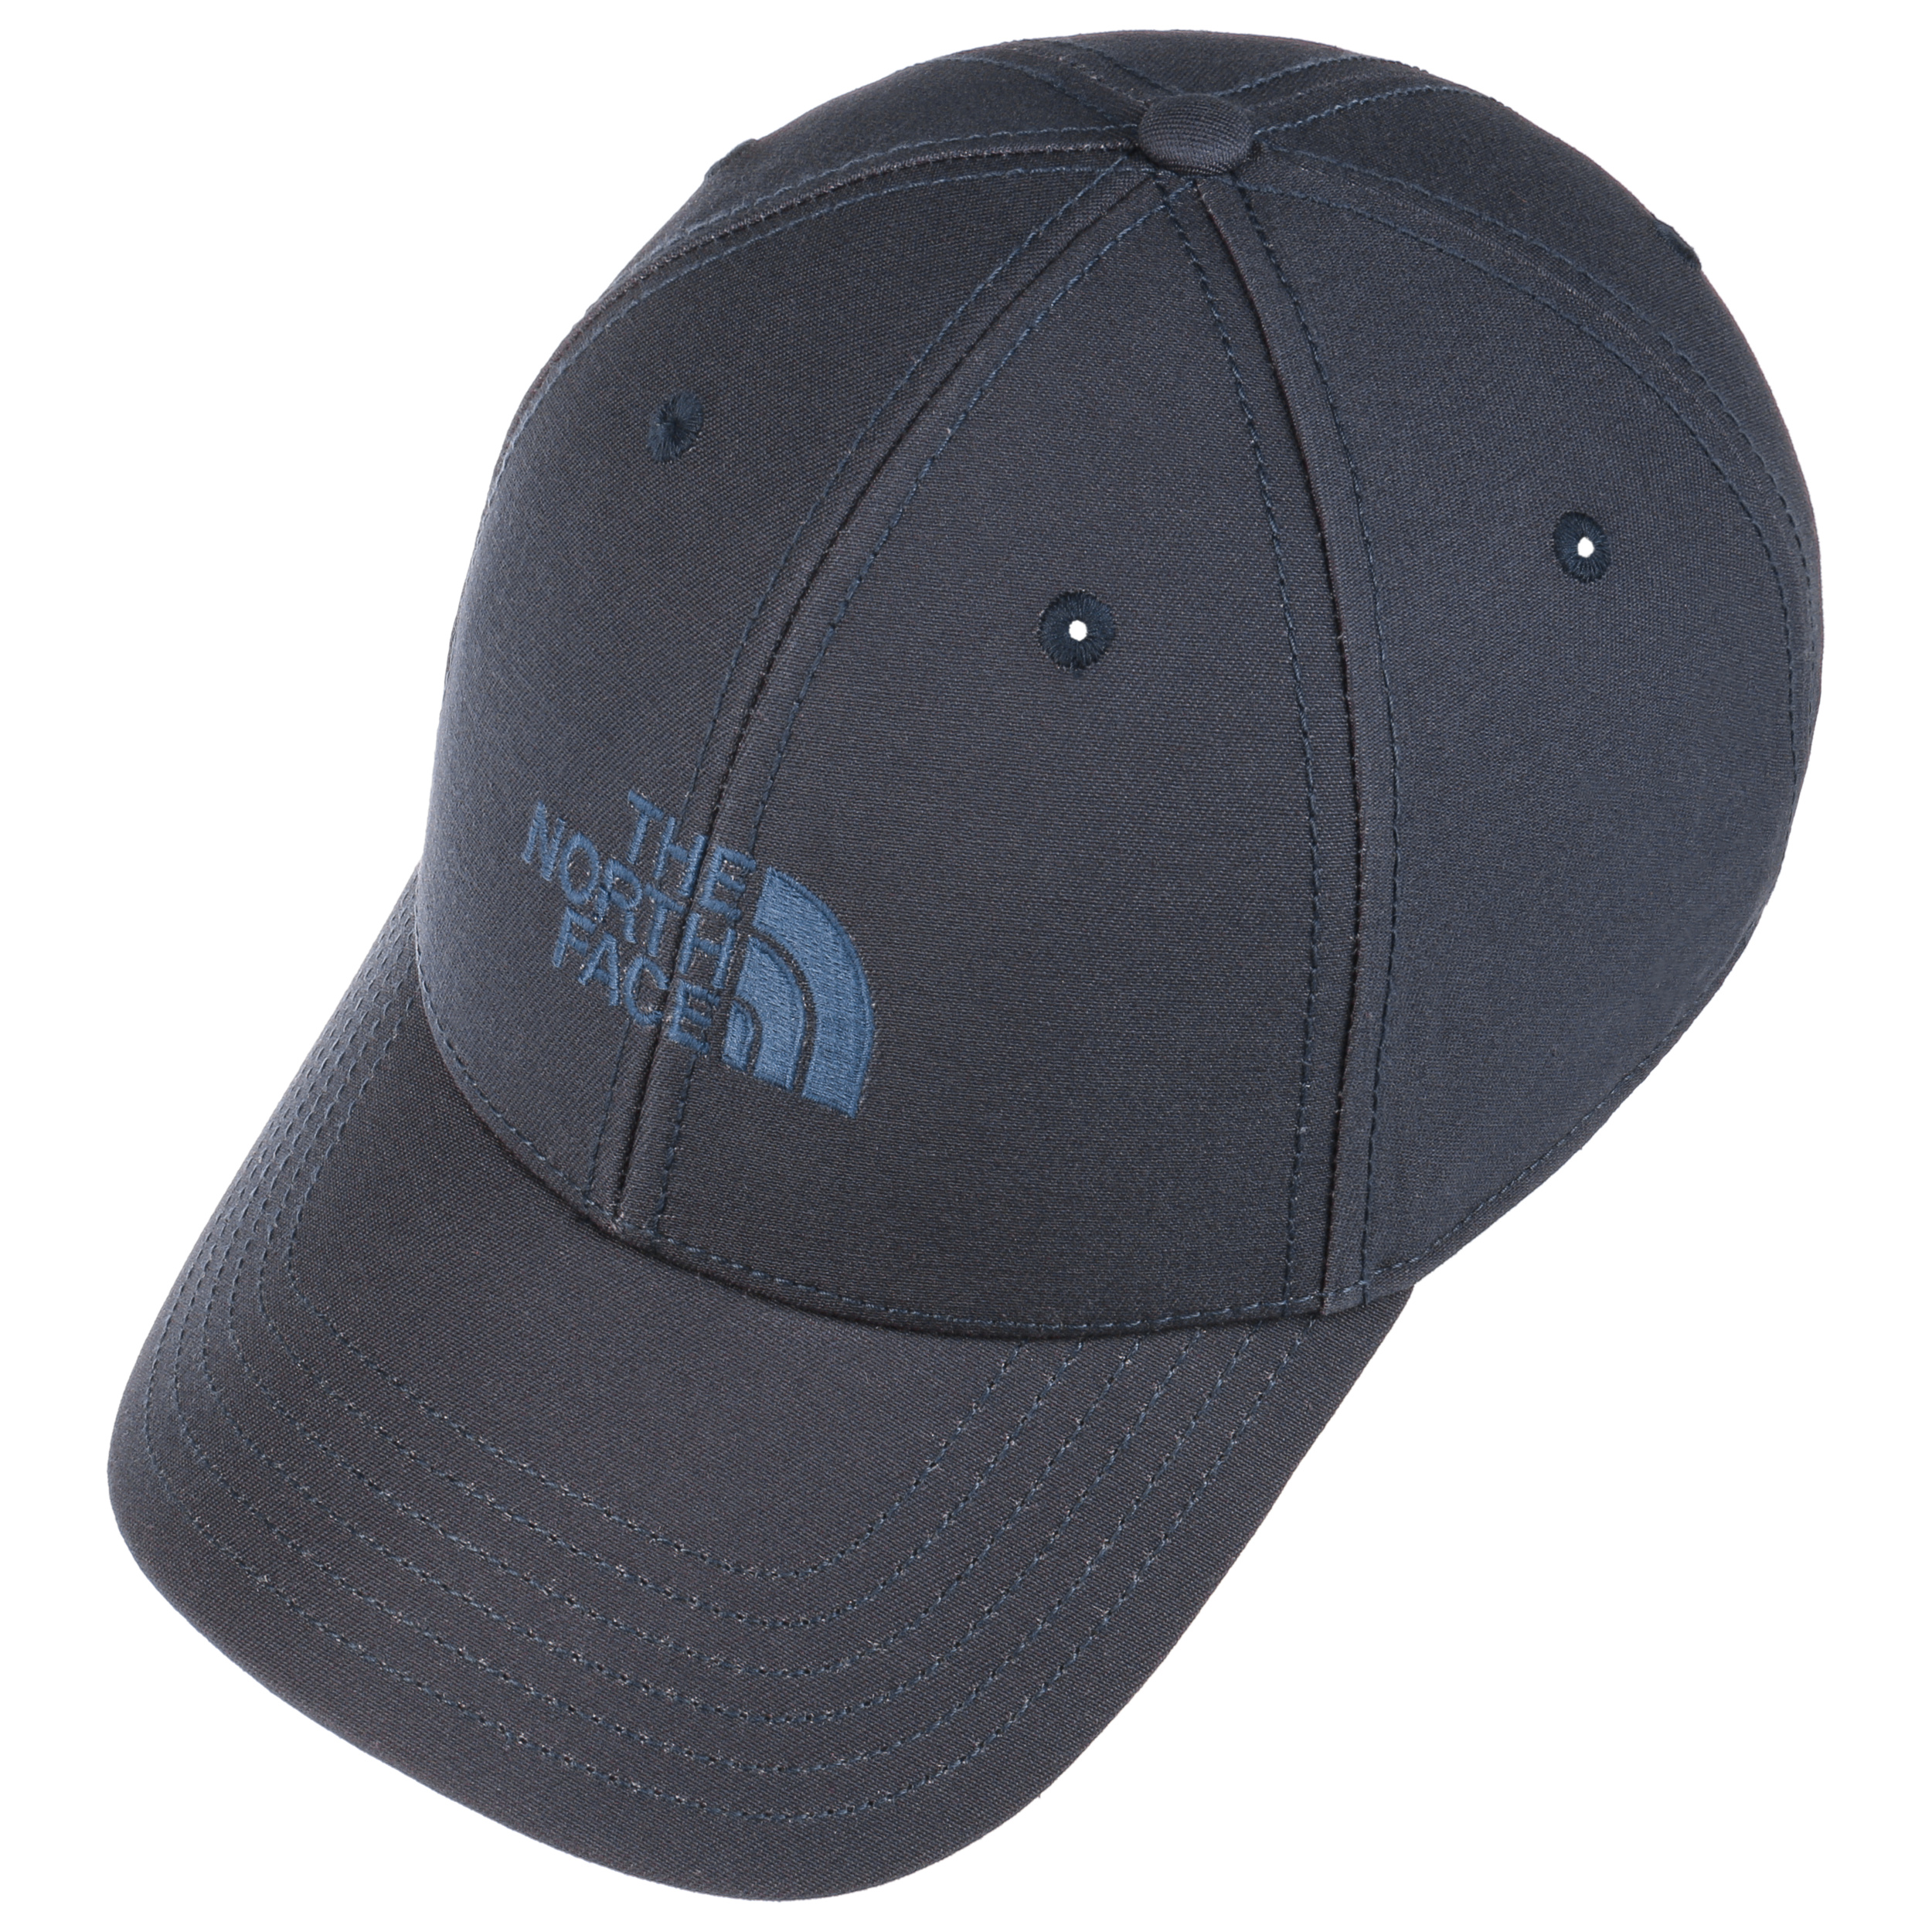 66 Classic Cap By The North Face 26 95